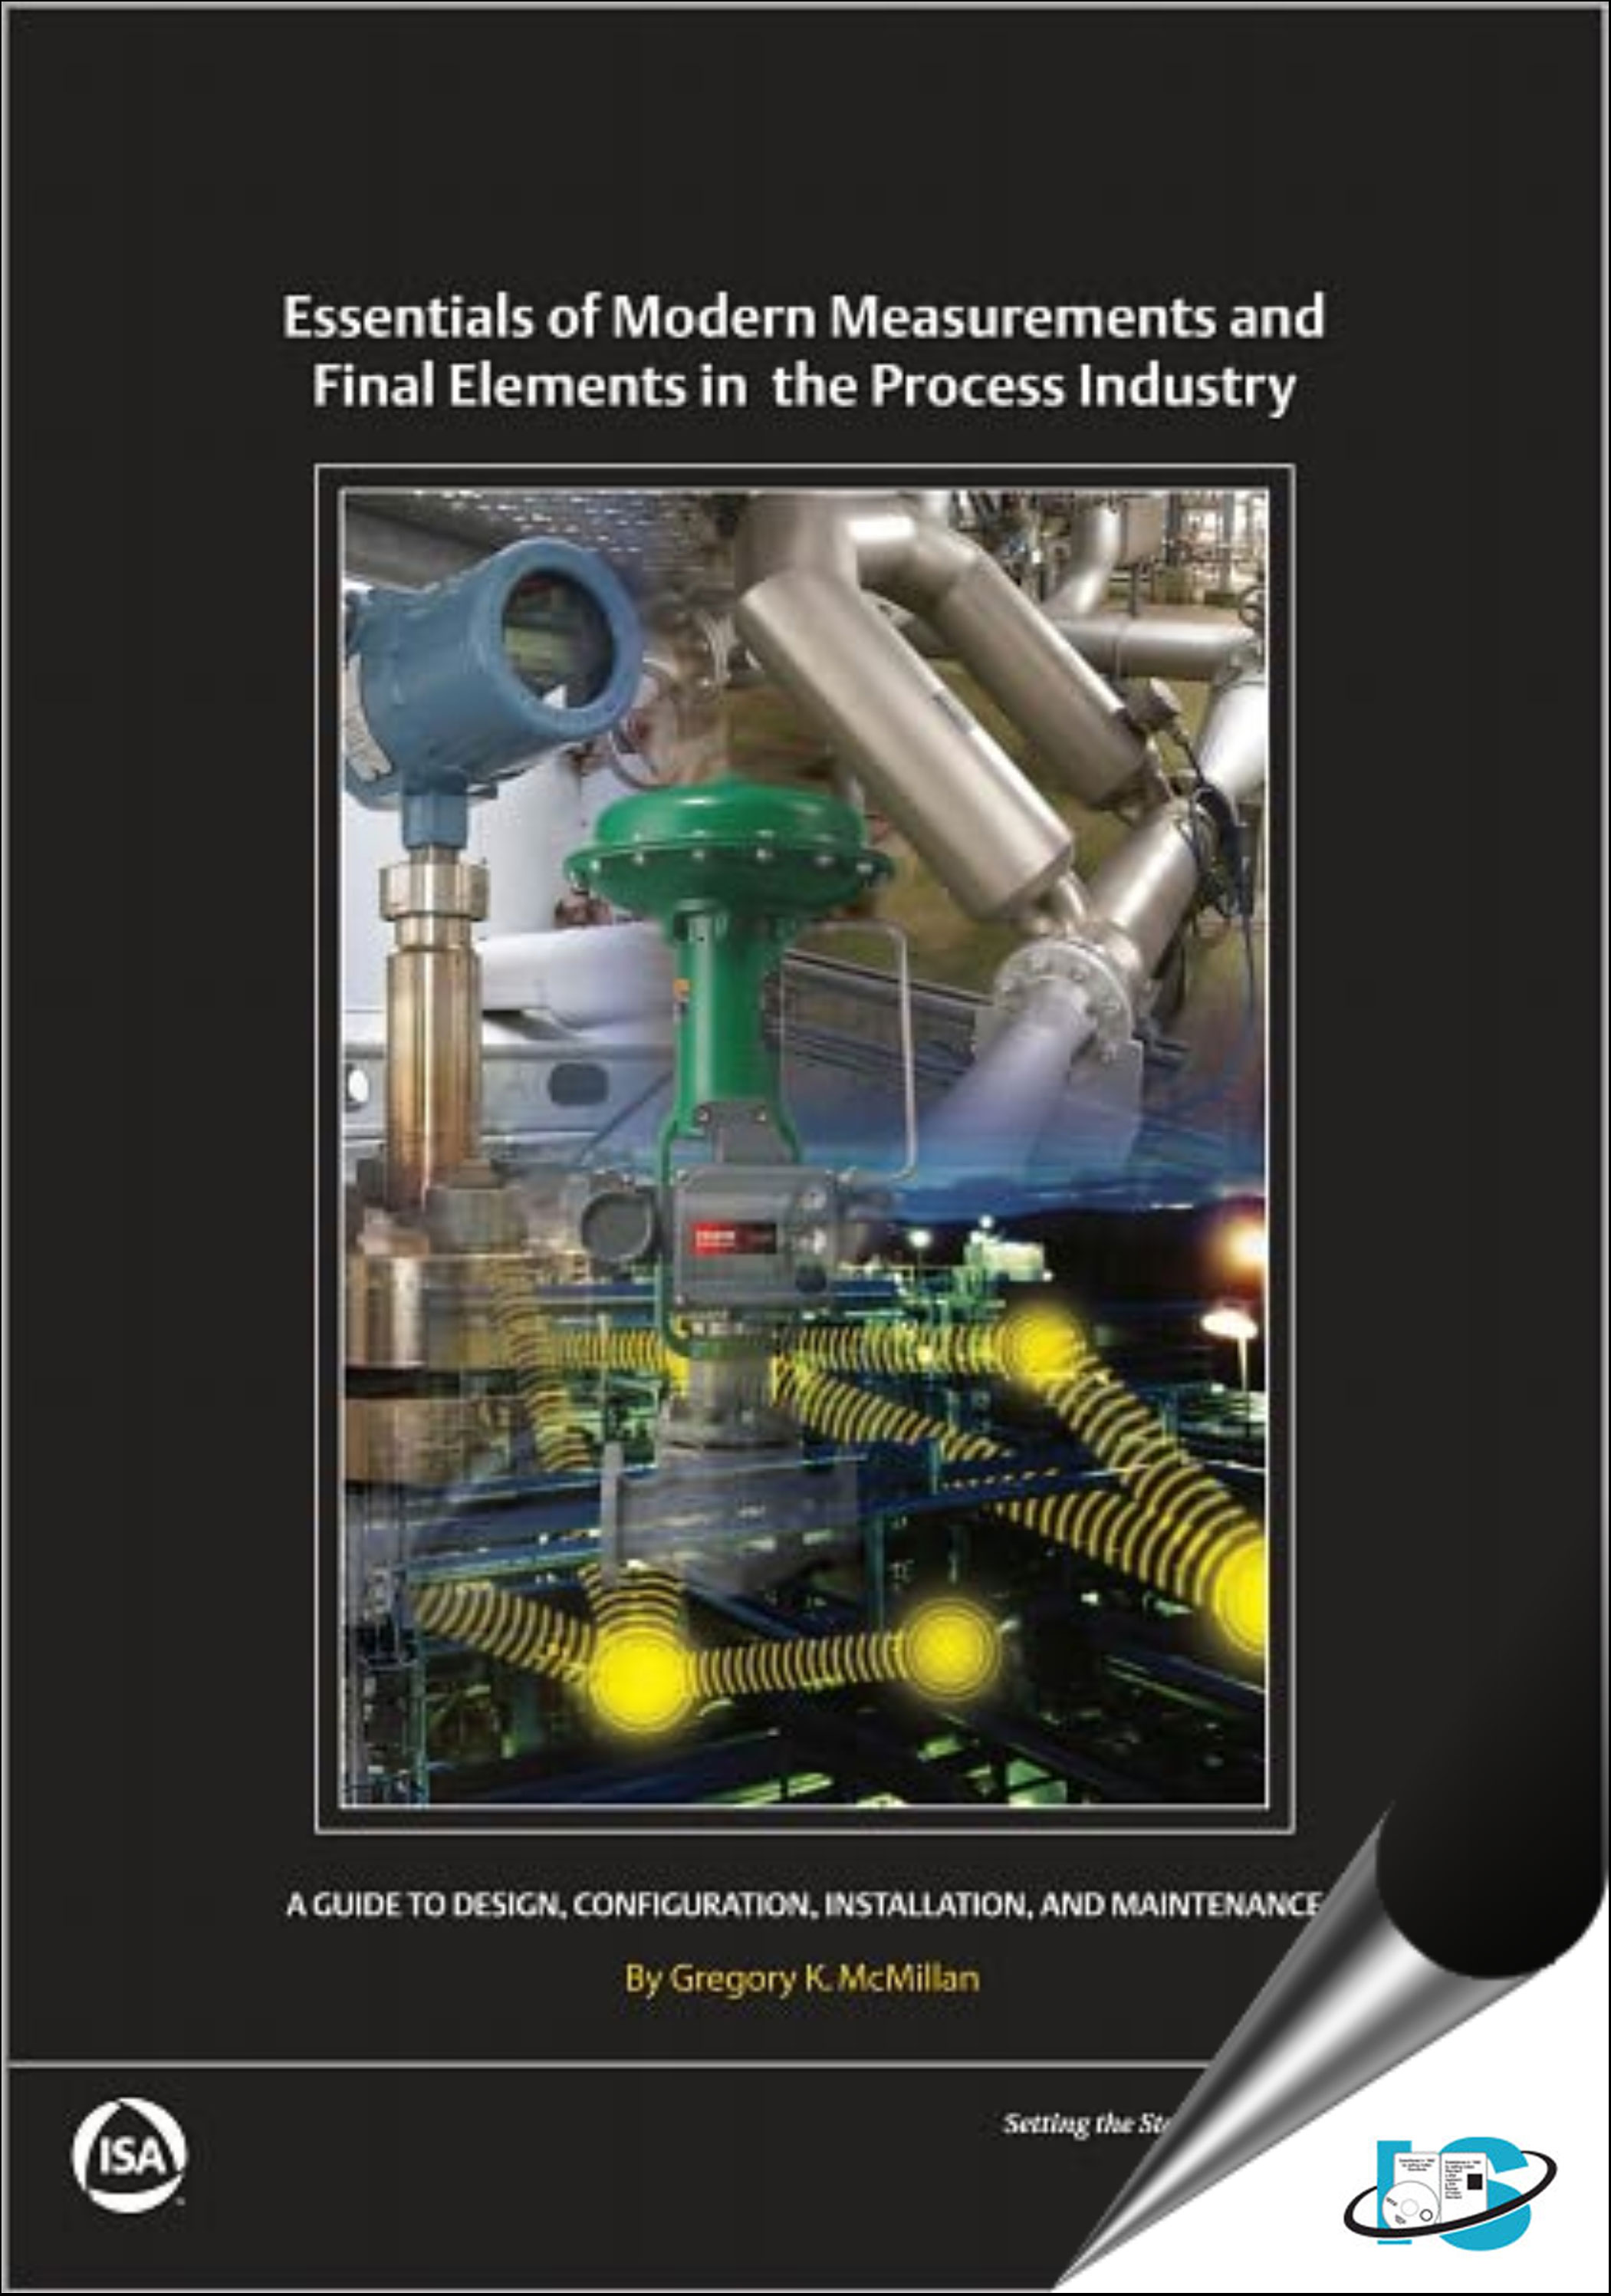 Essentials of Modern Measurements and Final Elements in the Process Industry: A Guide to Design, Configuration, Installation, and Maintenance Gregory K. McMillan